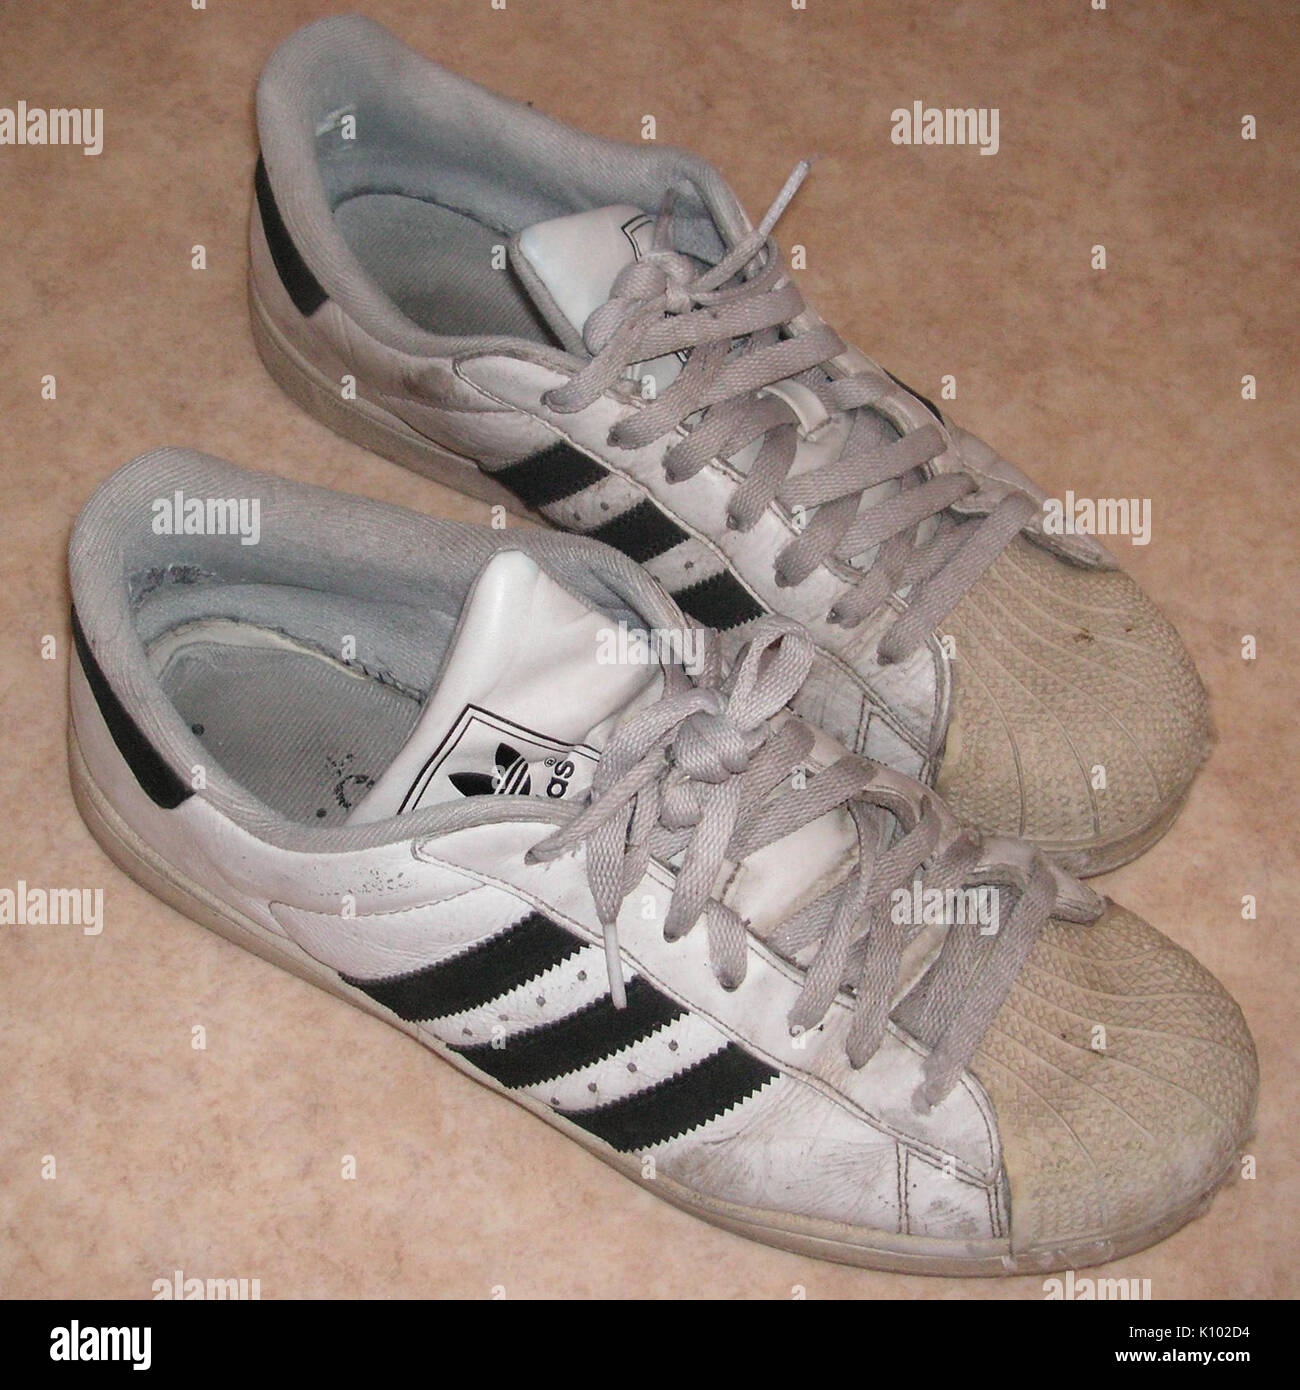 Adidas history High Resolution Stock Photography and Images - Alamy